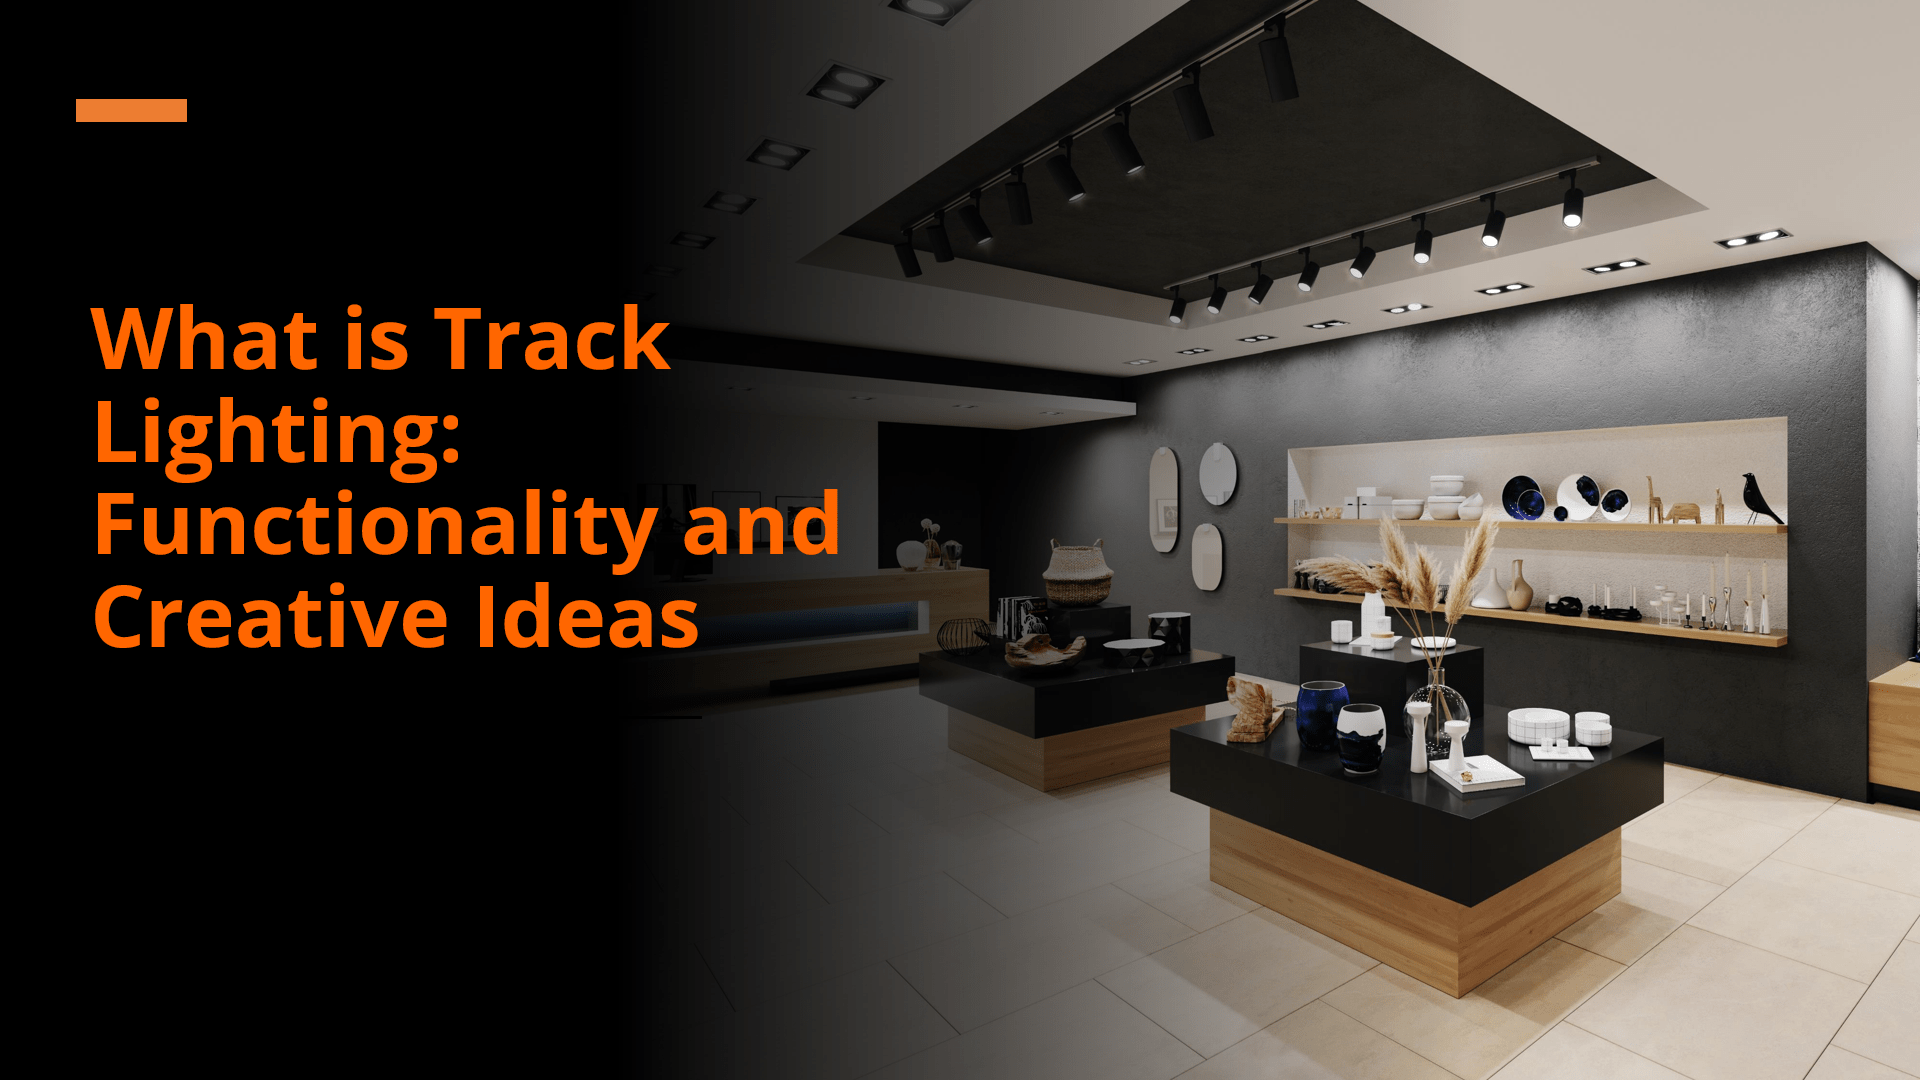 What is Track Lighting: Functionality and Creative Ideas